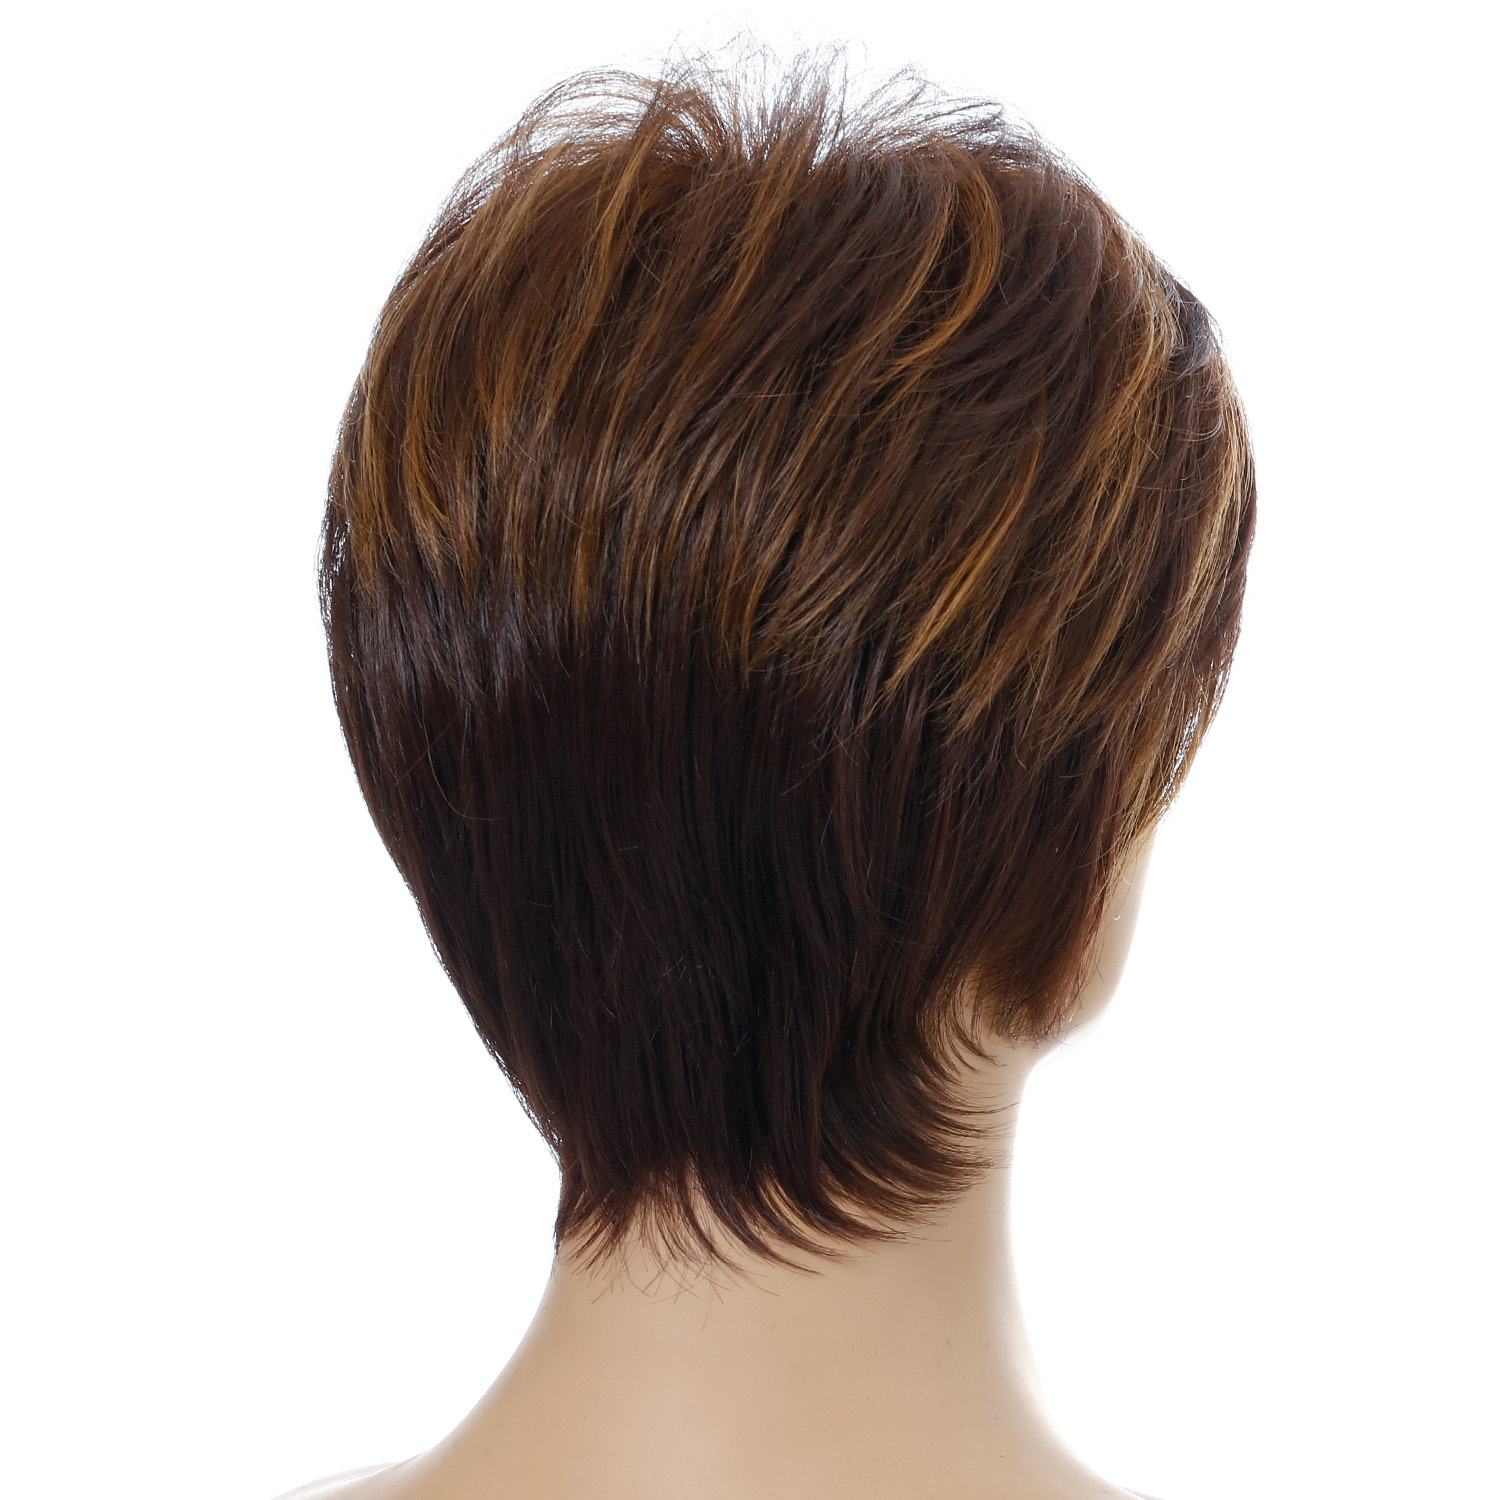 A set of synthetic wigs for women featuring light brown short curly hair, styled in a small curly fashion